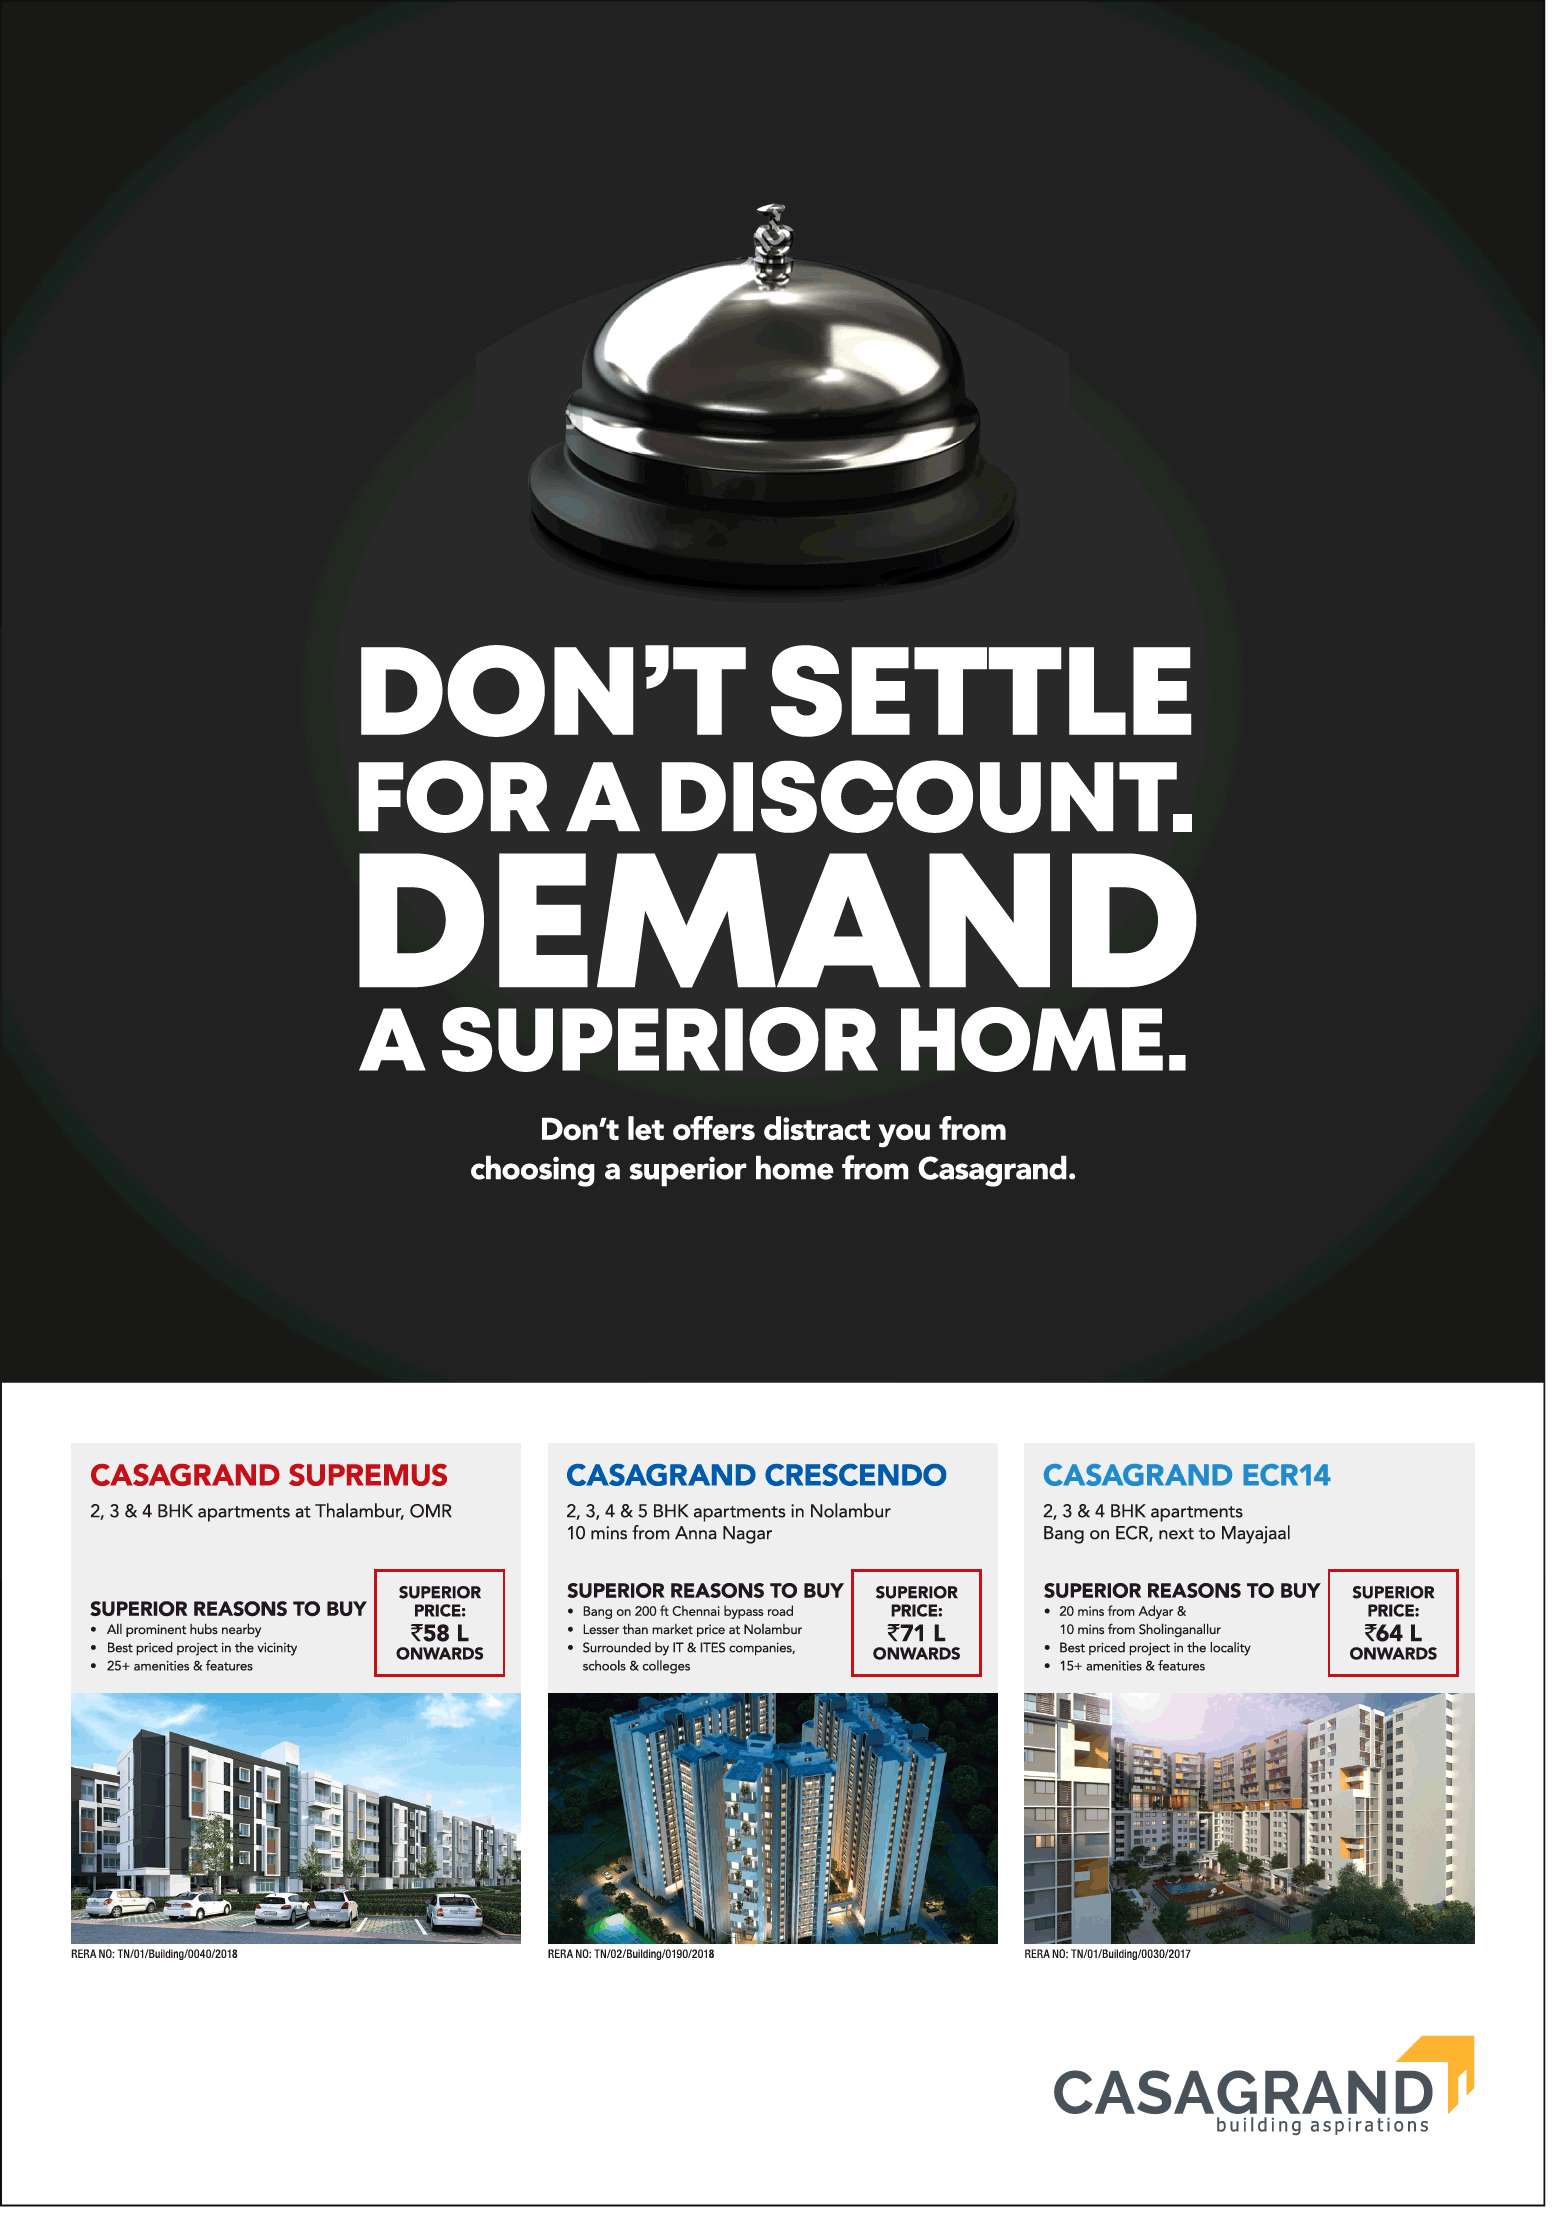 Don't settle for a discount, demand for a superior home at Casagrand in Chennai Update